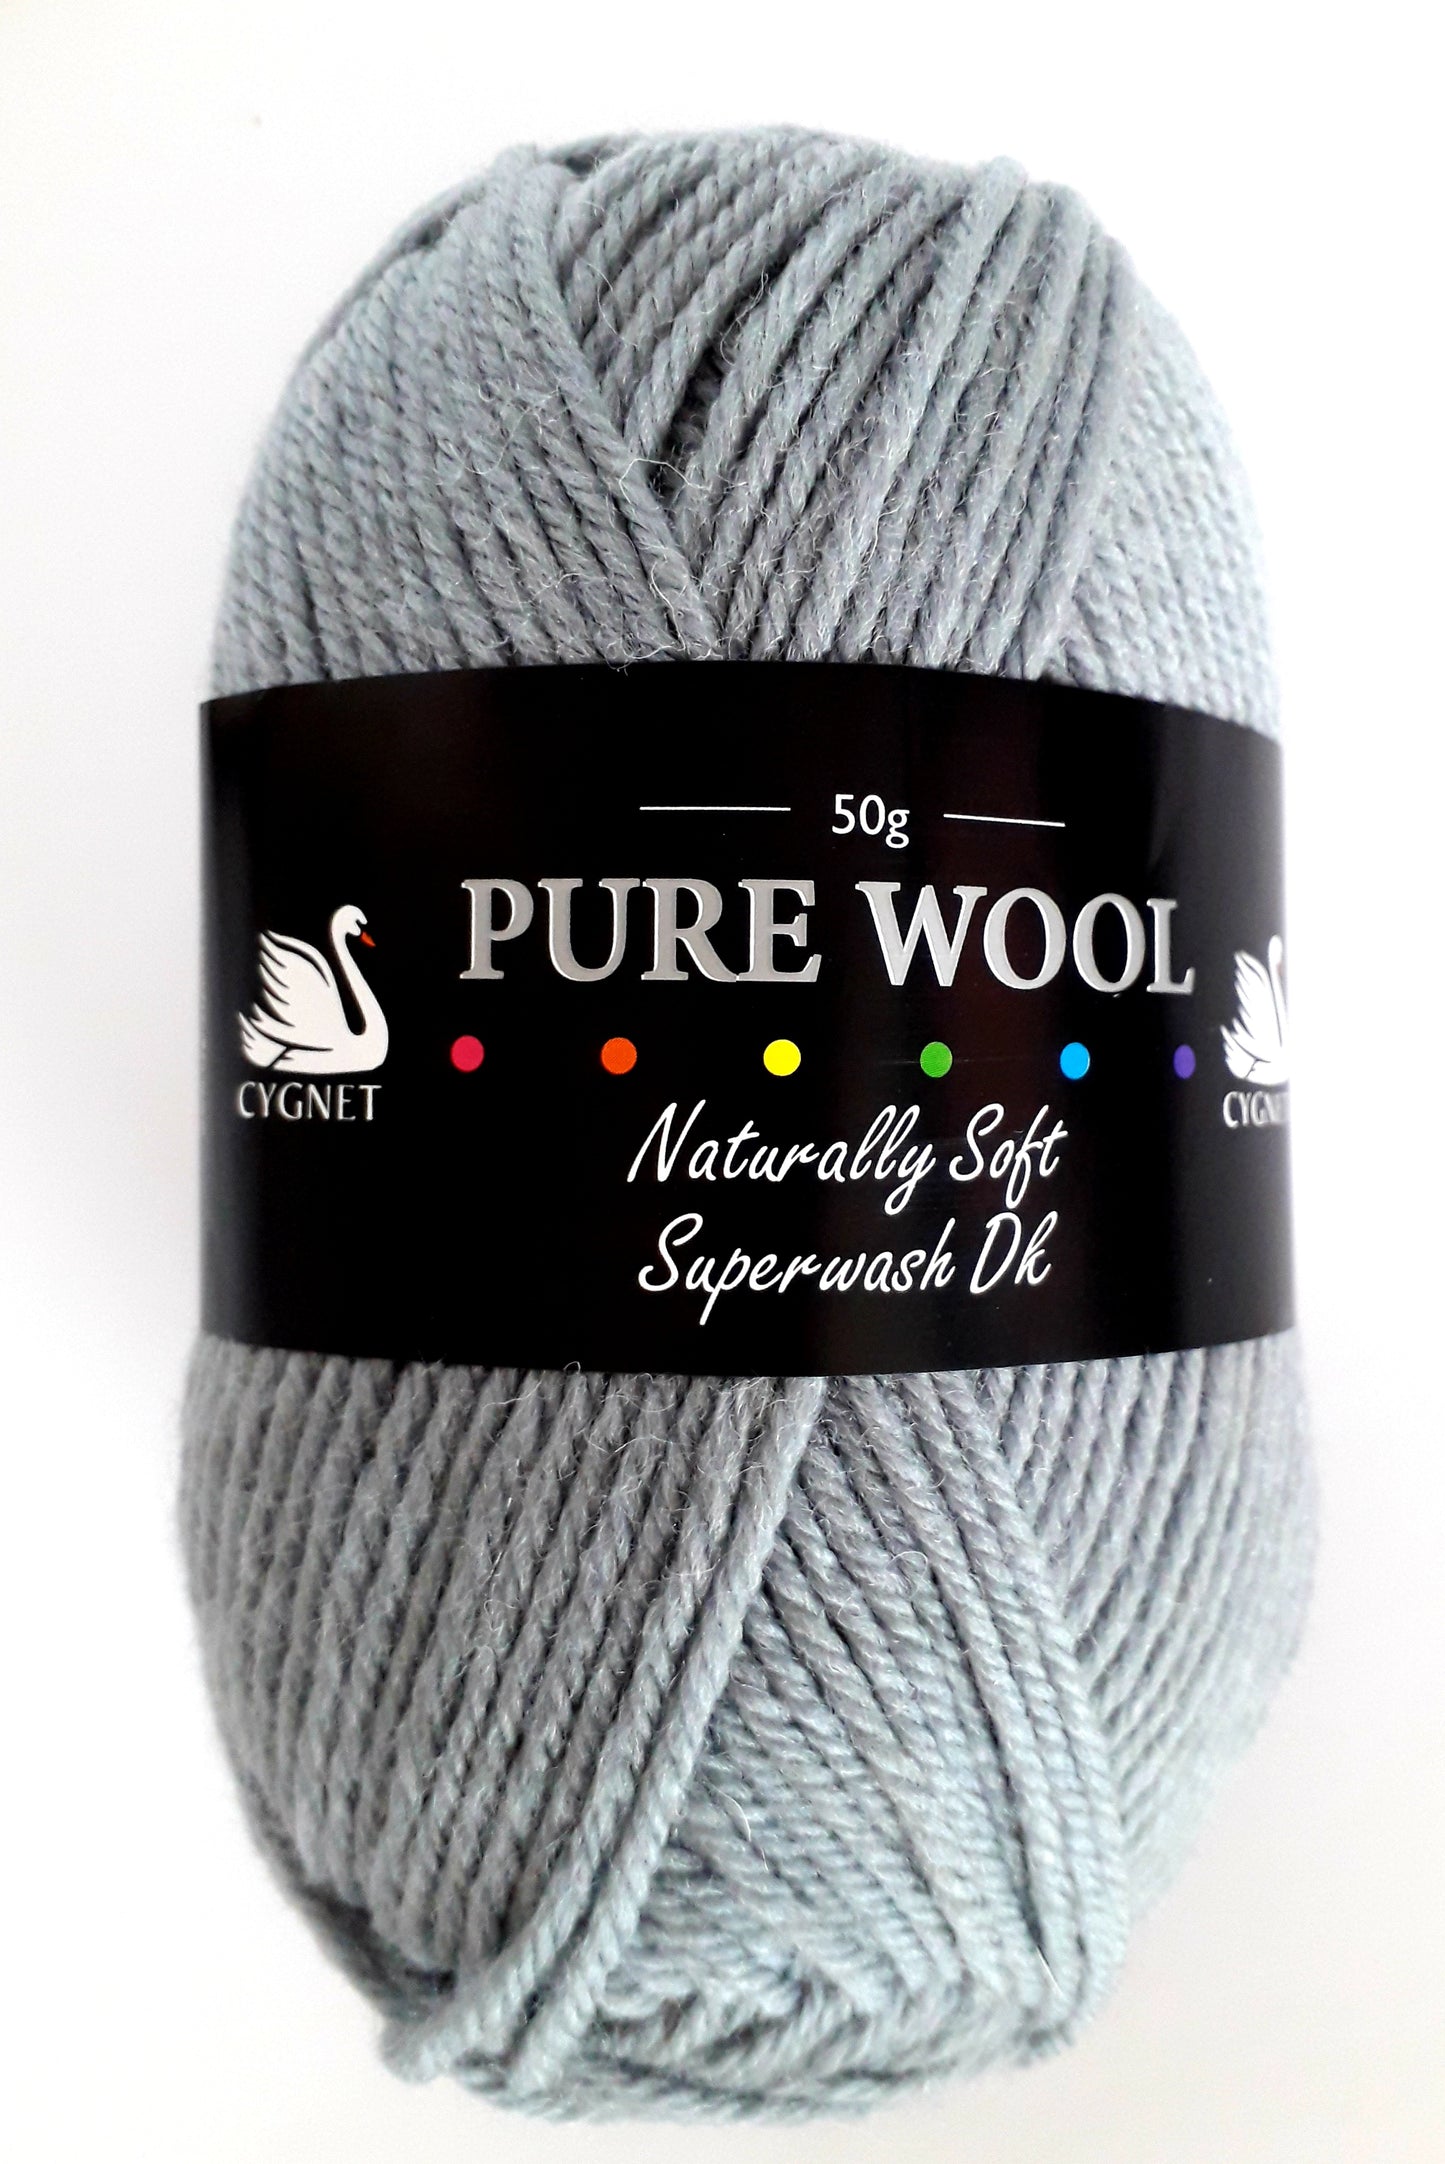 A ball of wool that is grey in colour and has a cygnet yarns ball band